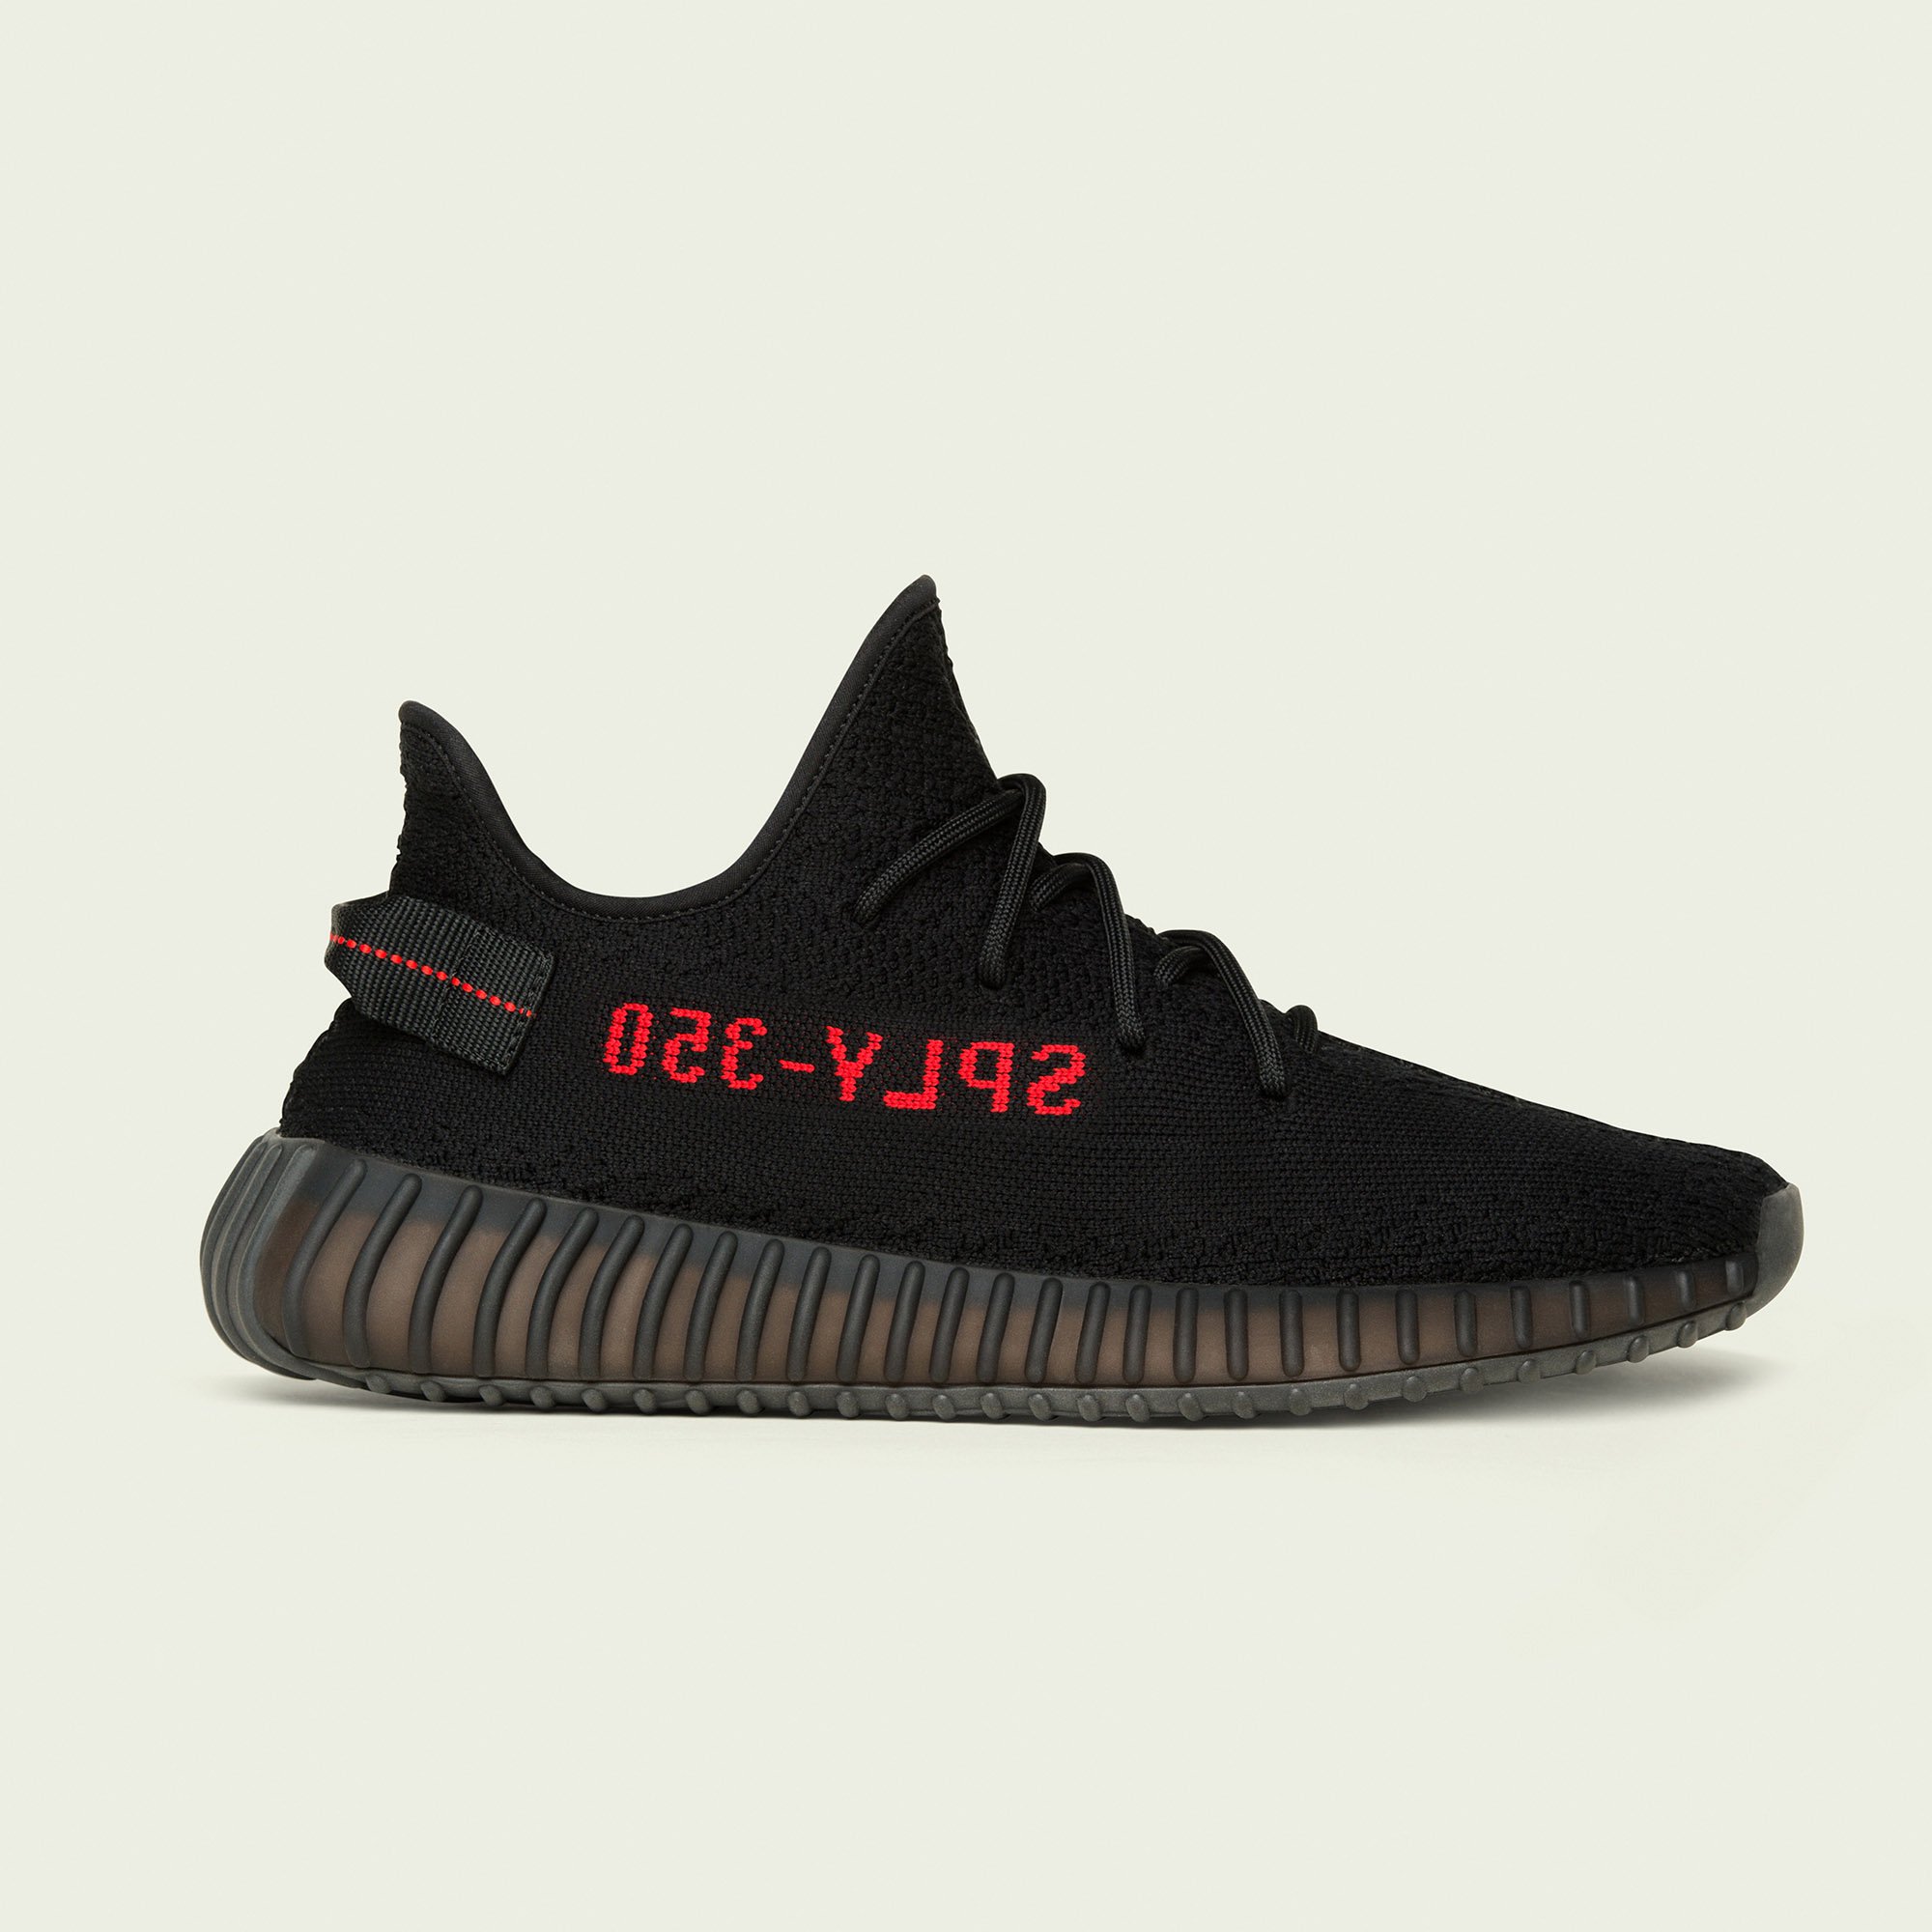 adidas-yeezy-boost-350-v2-core-black-red-2